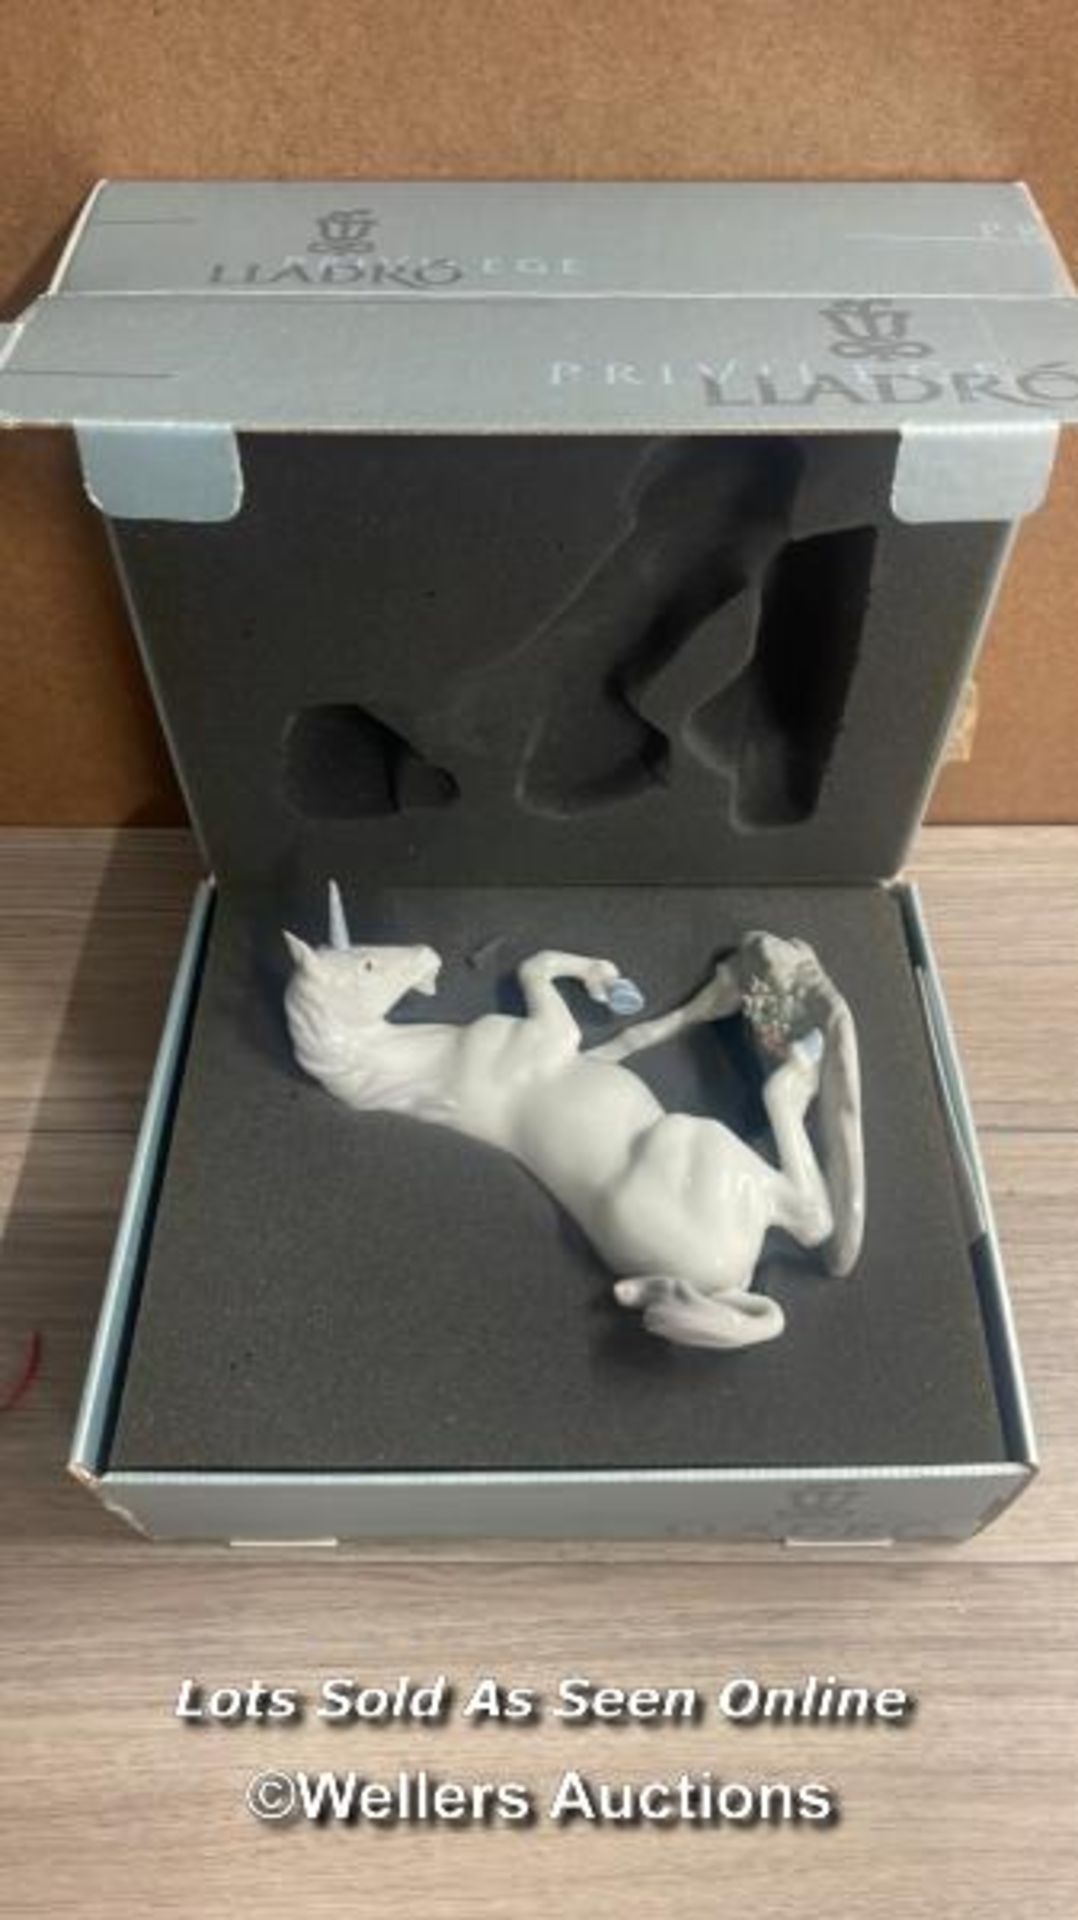 LLADRO PRIVILAGE COLLECTION "MAGICAL UNICORN" NO. 01007697, BOXED - Image 7 of 8